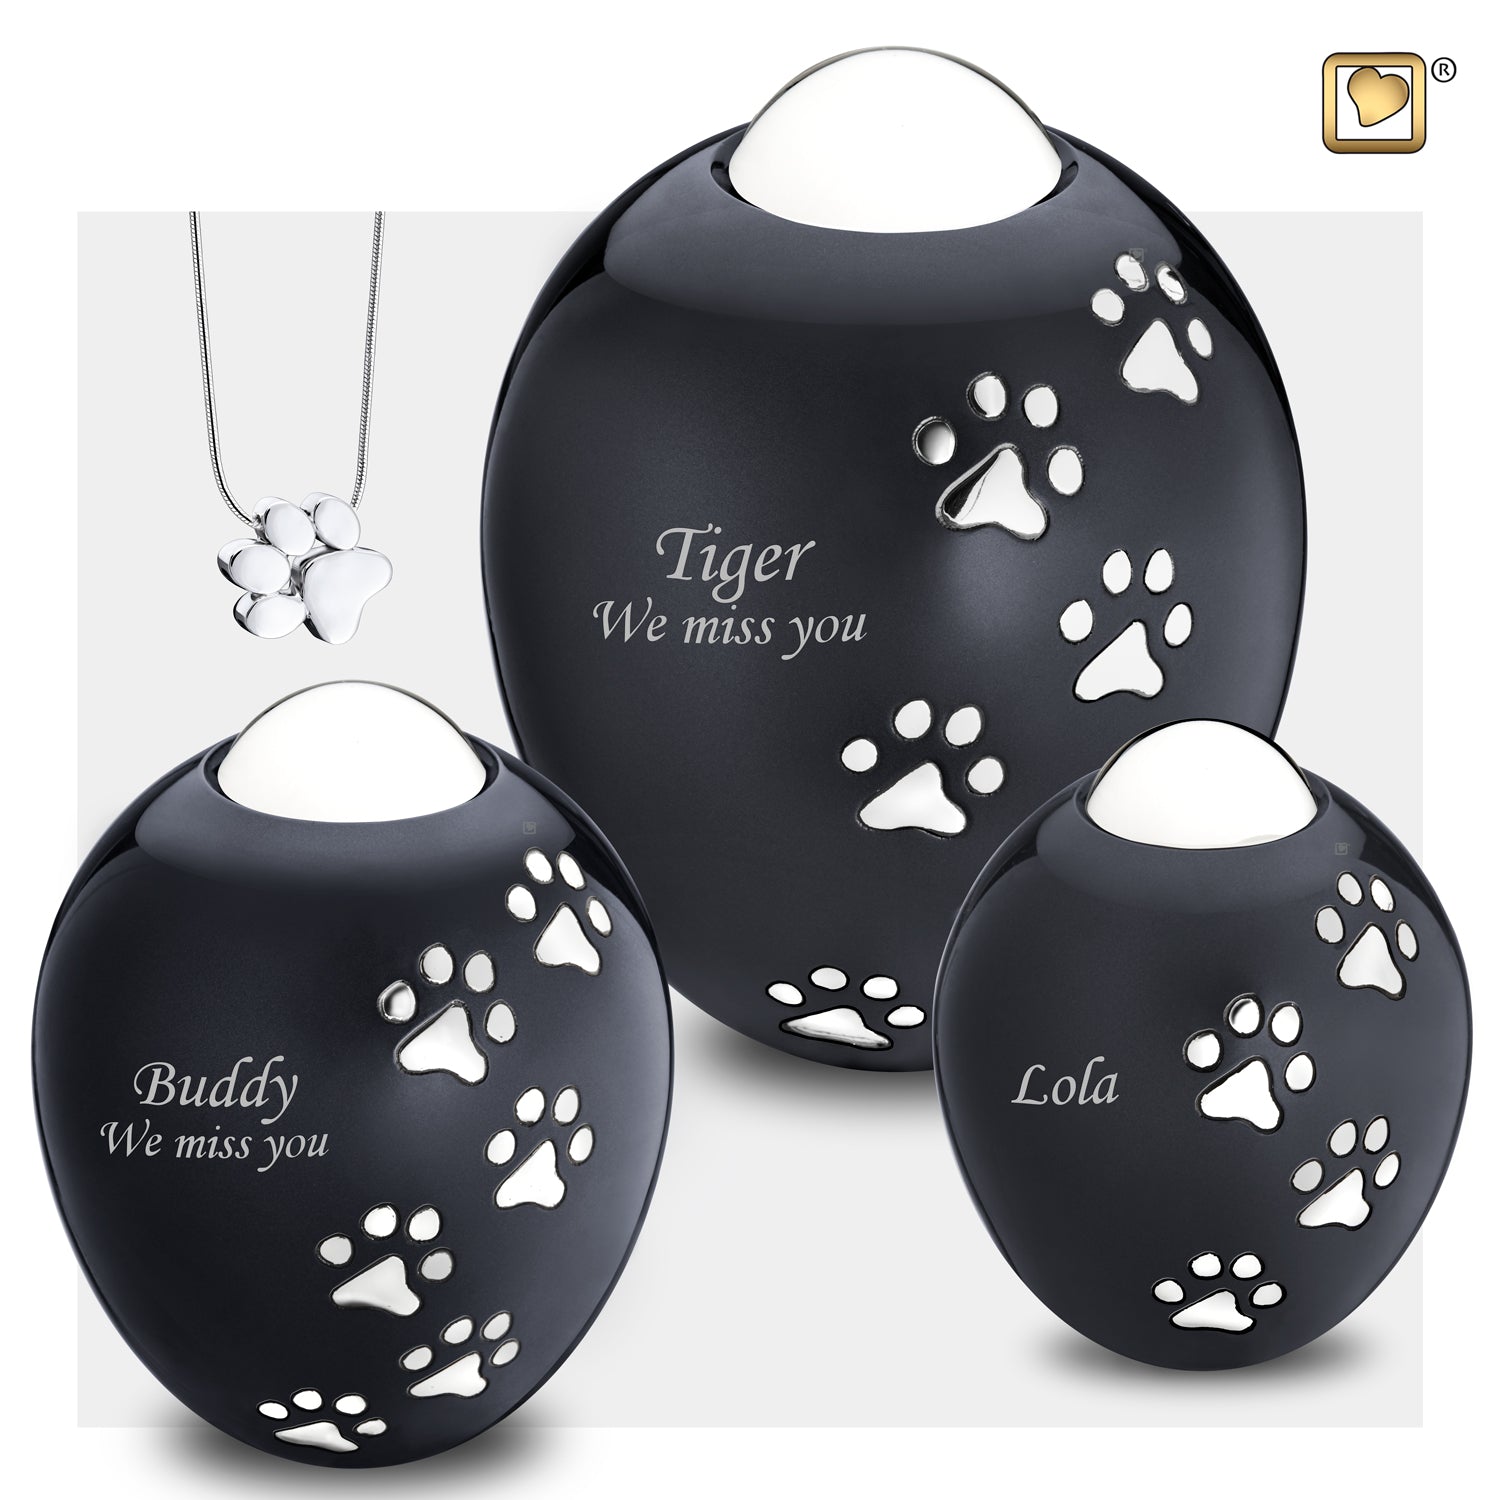 Adore™ Midnight Black Colored Paw Printed Oval Shaped Small Pet Cremation Urn